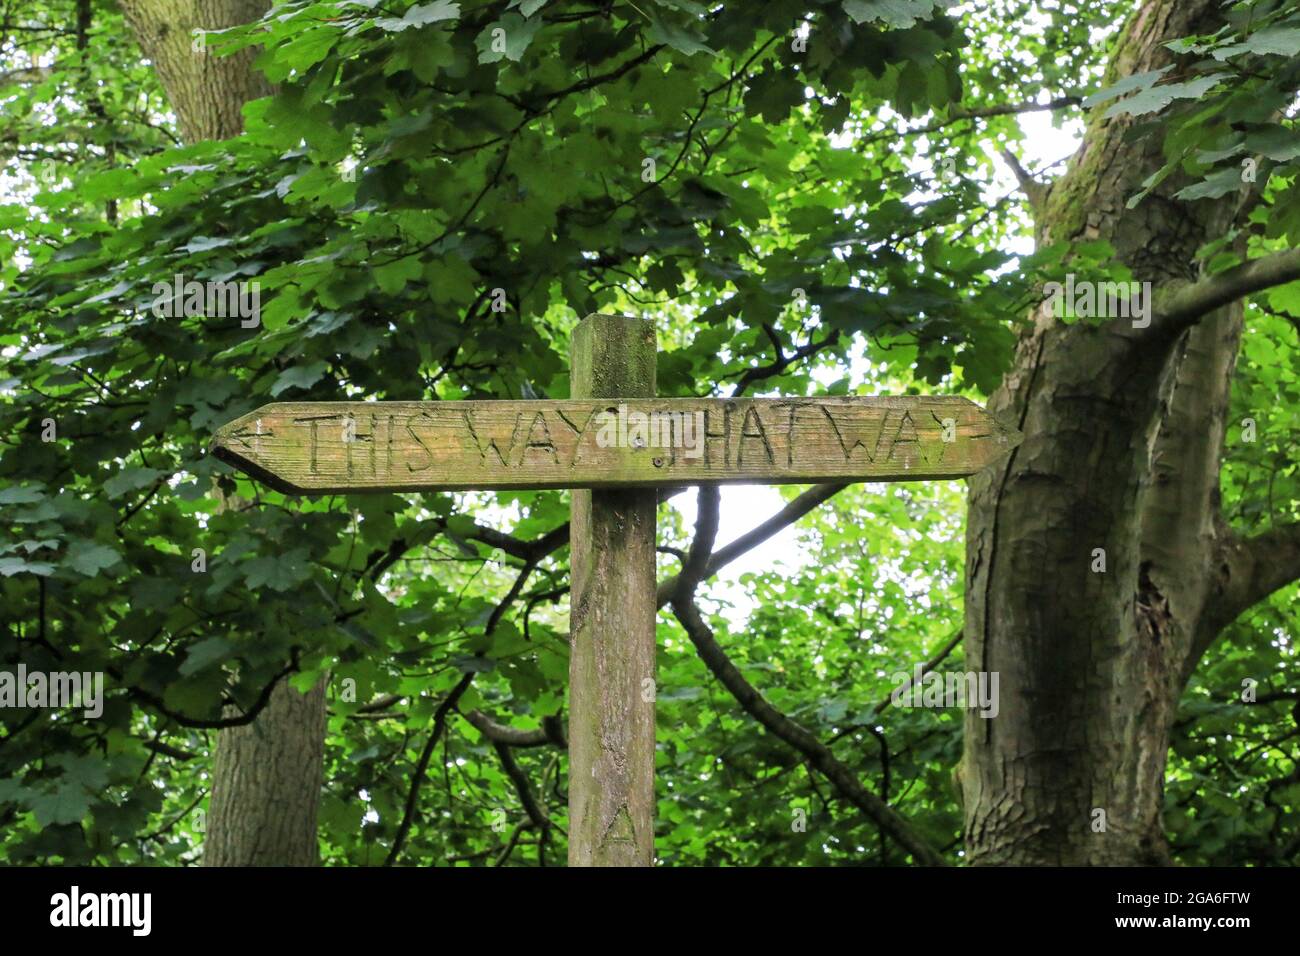 A quirky and unusual wooden sign post saying 'this way and that way', The Wrekin, Shropshire, England, UK Stock Photo